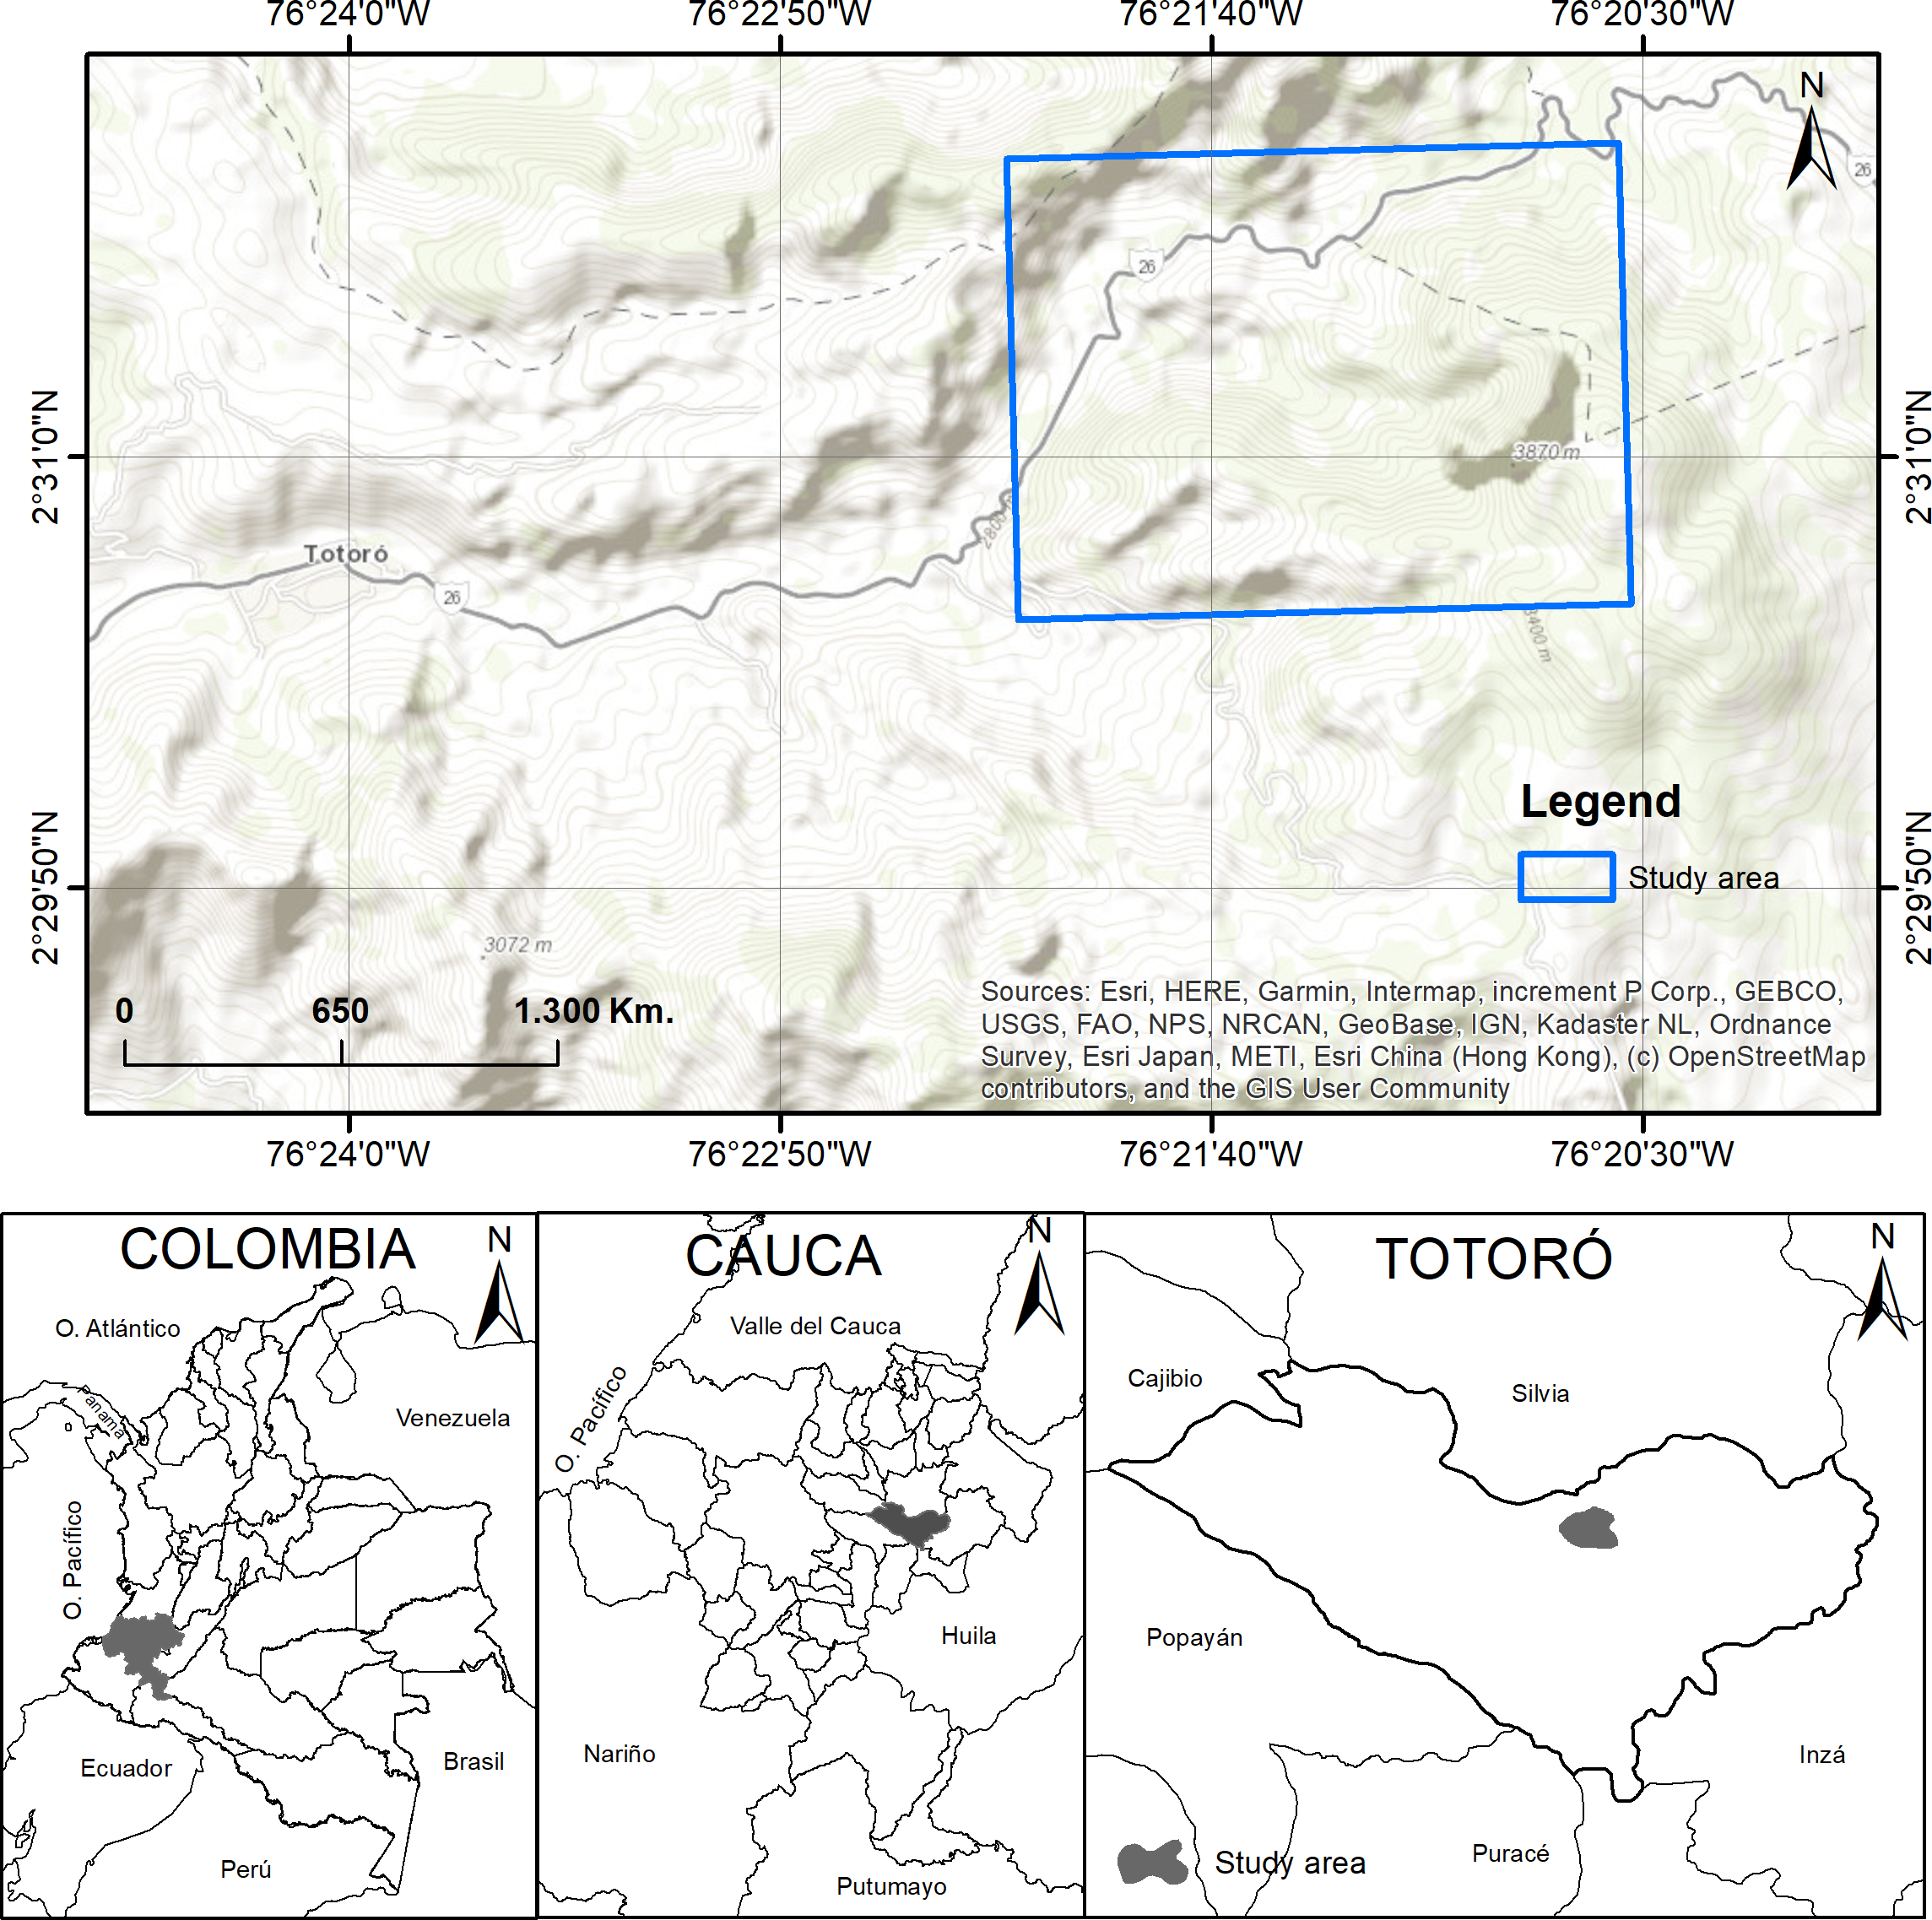 Unraveling plant-pollinator interactions from a south-west Andean forest in  Colombia [PeerJ]